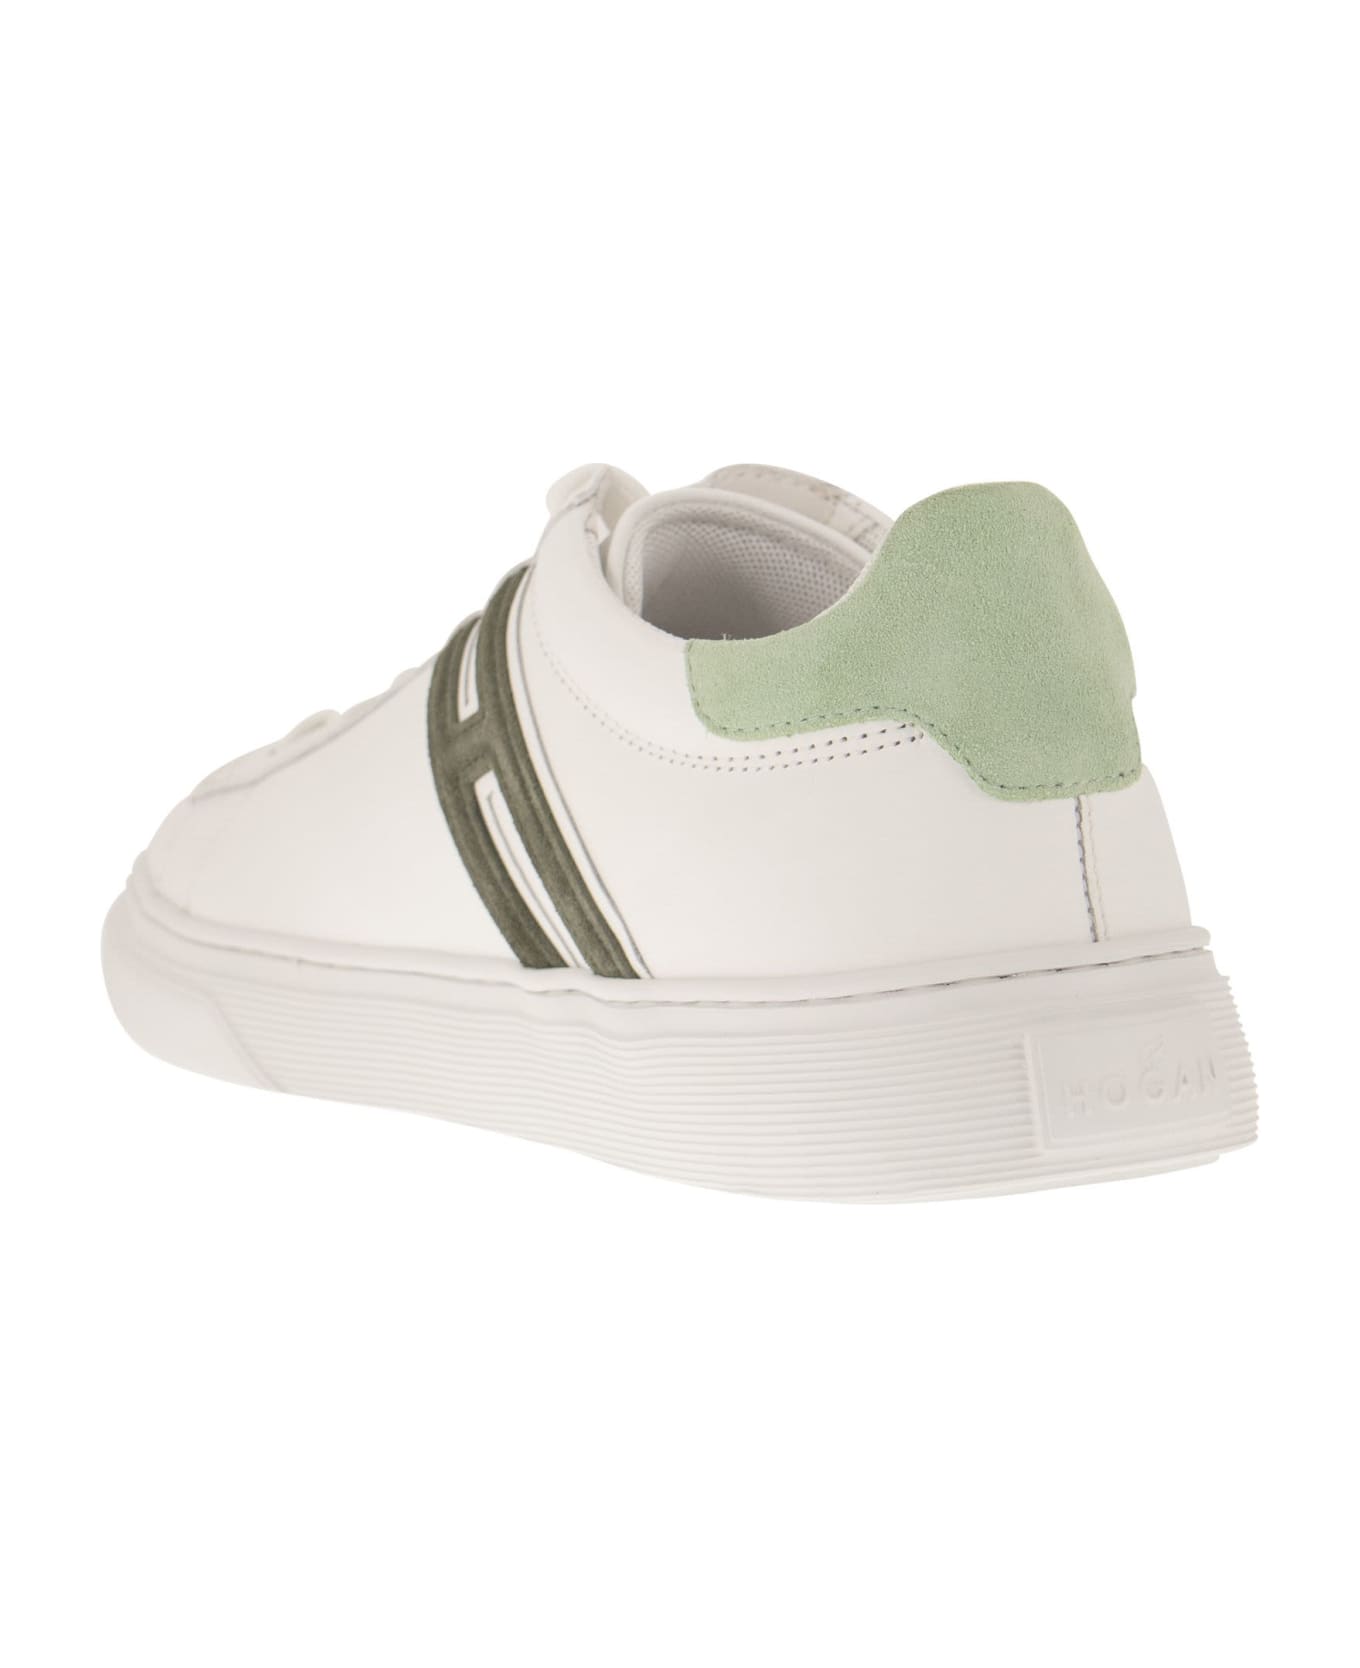 Hogan Sneakers "h365" In Leather - Green/white スニーカー